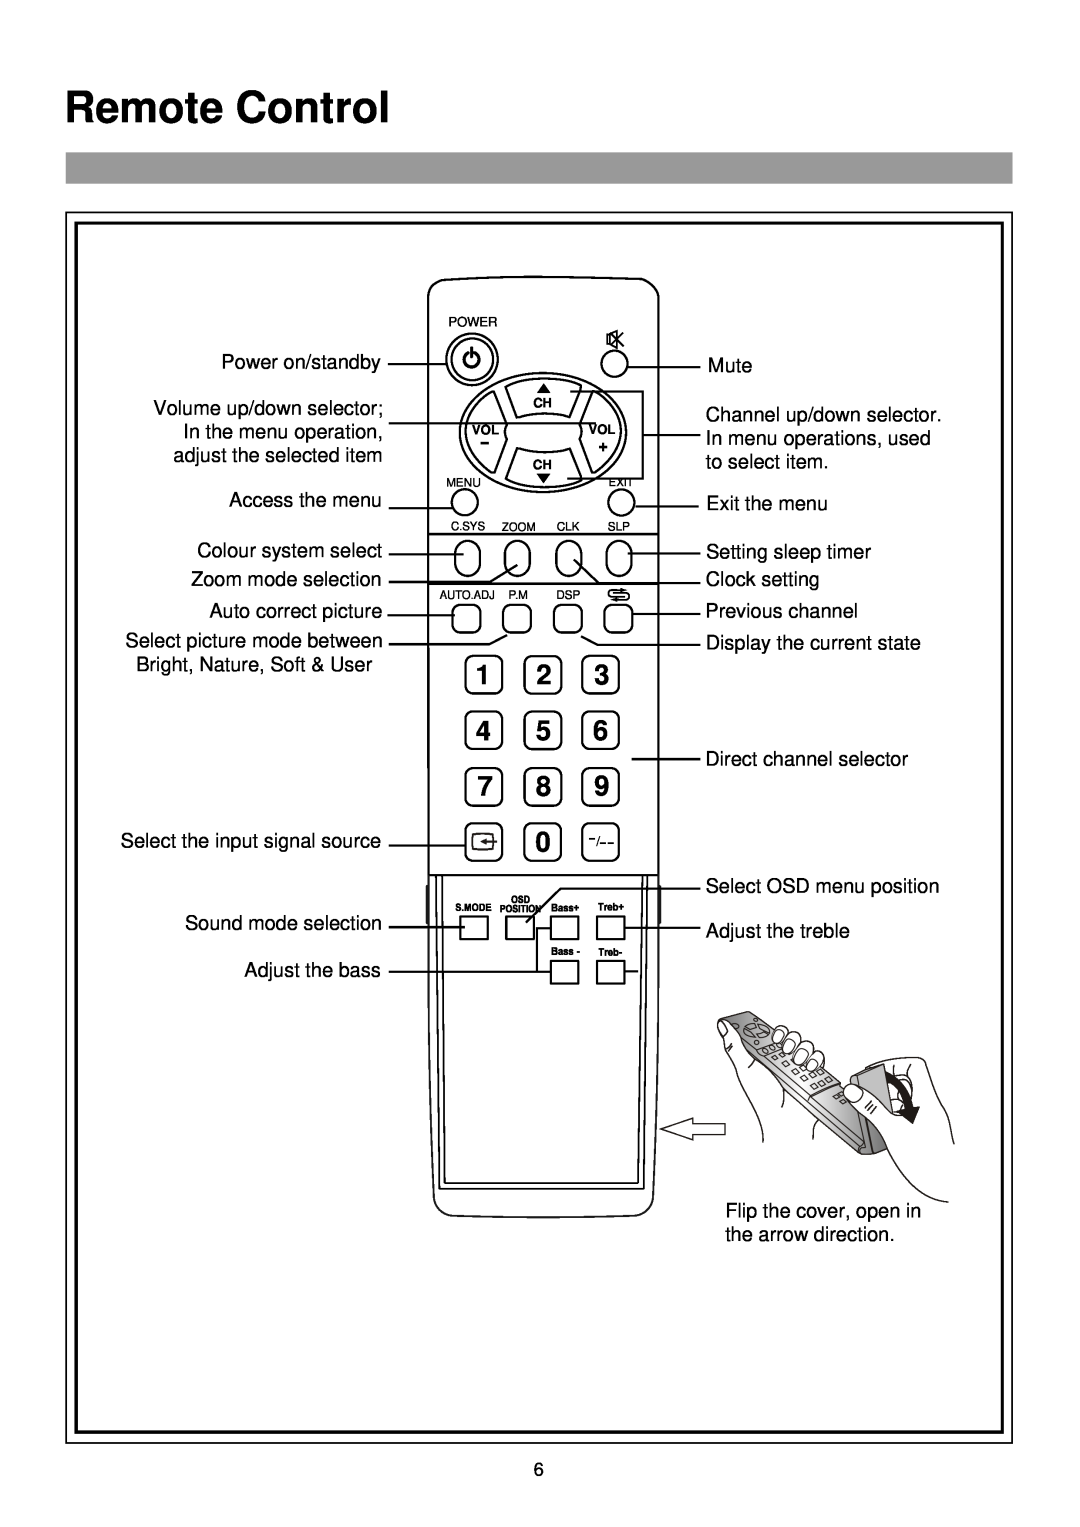 Palsonic TFTV435WS owner manual Remote Control, 1 2 4 5 7 8 